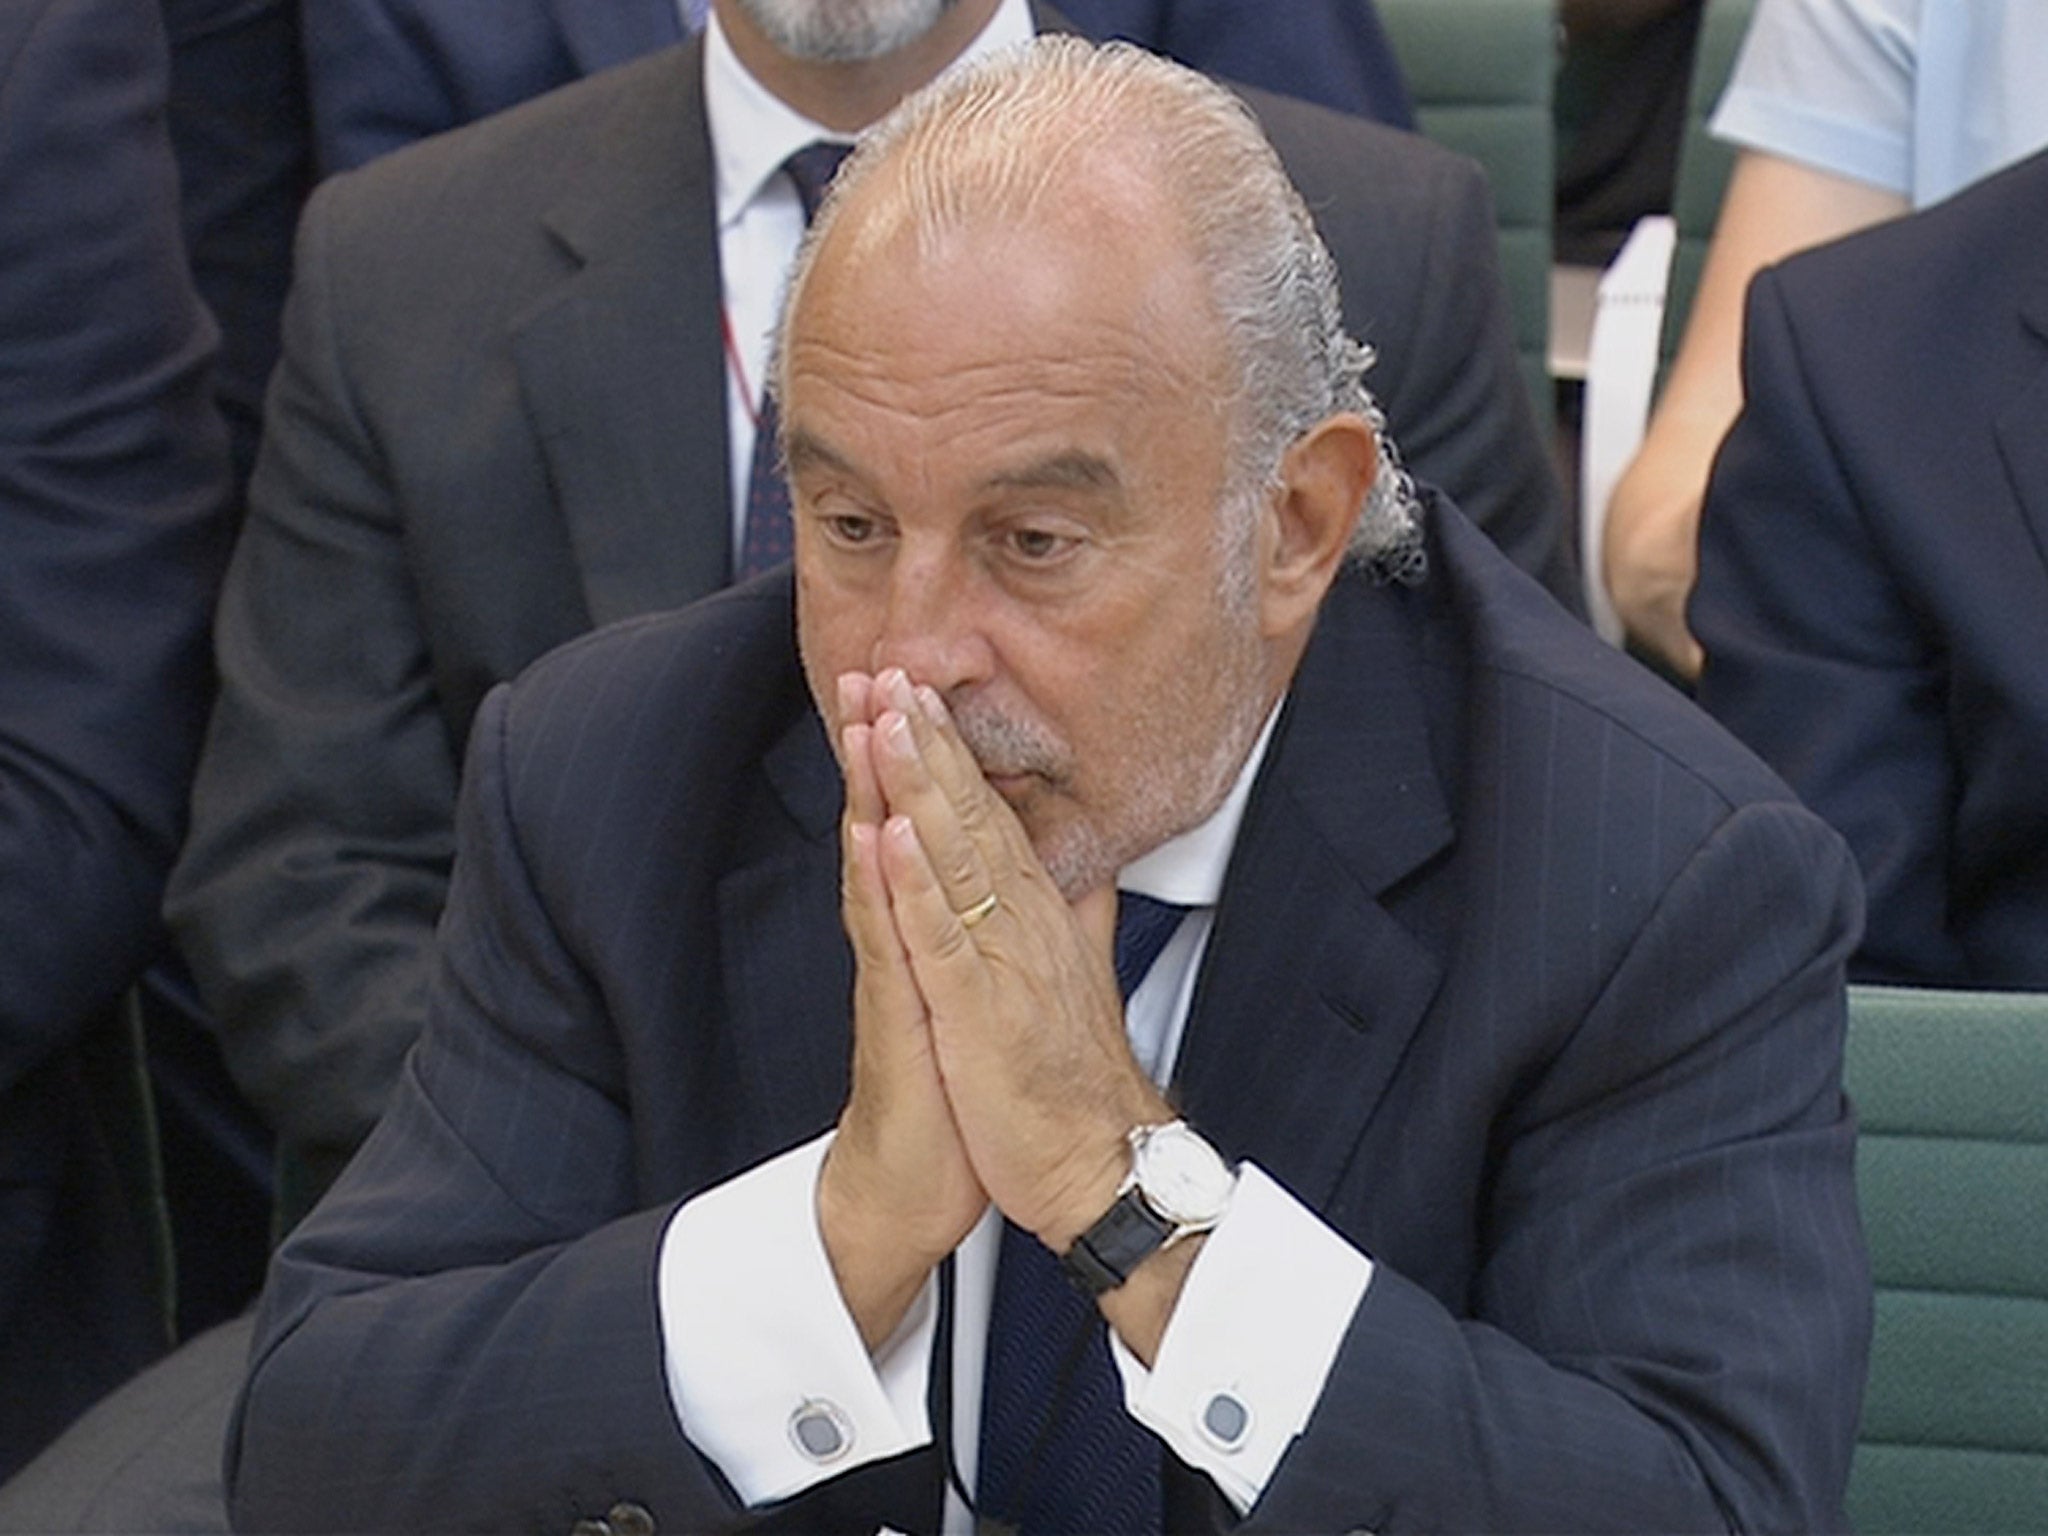 The Arcadia Group boss Sir Philip Green has been forced to pay £363m into the pension fund for BHS